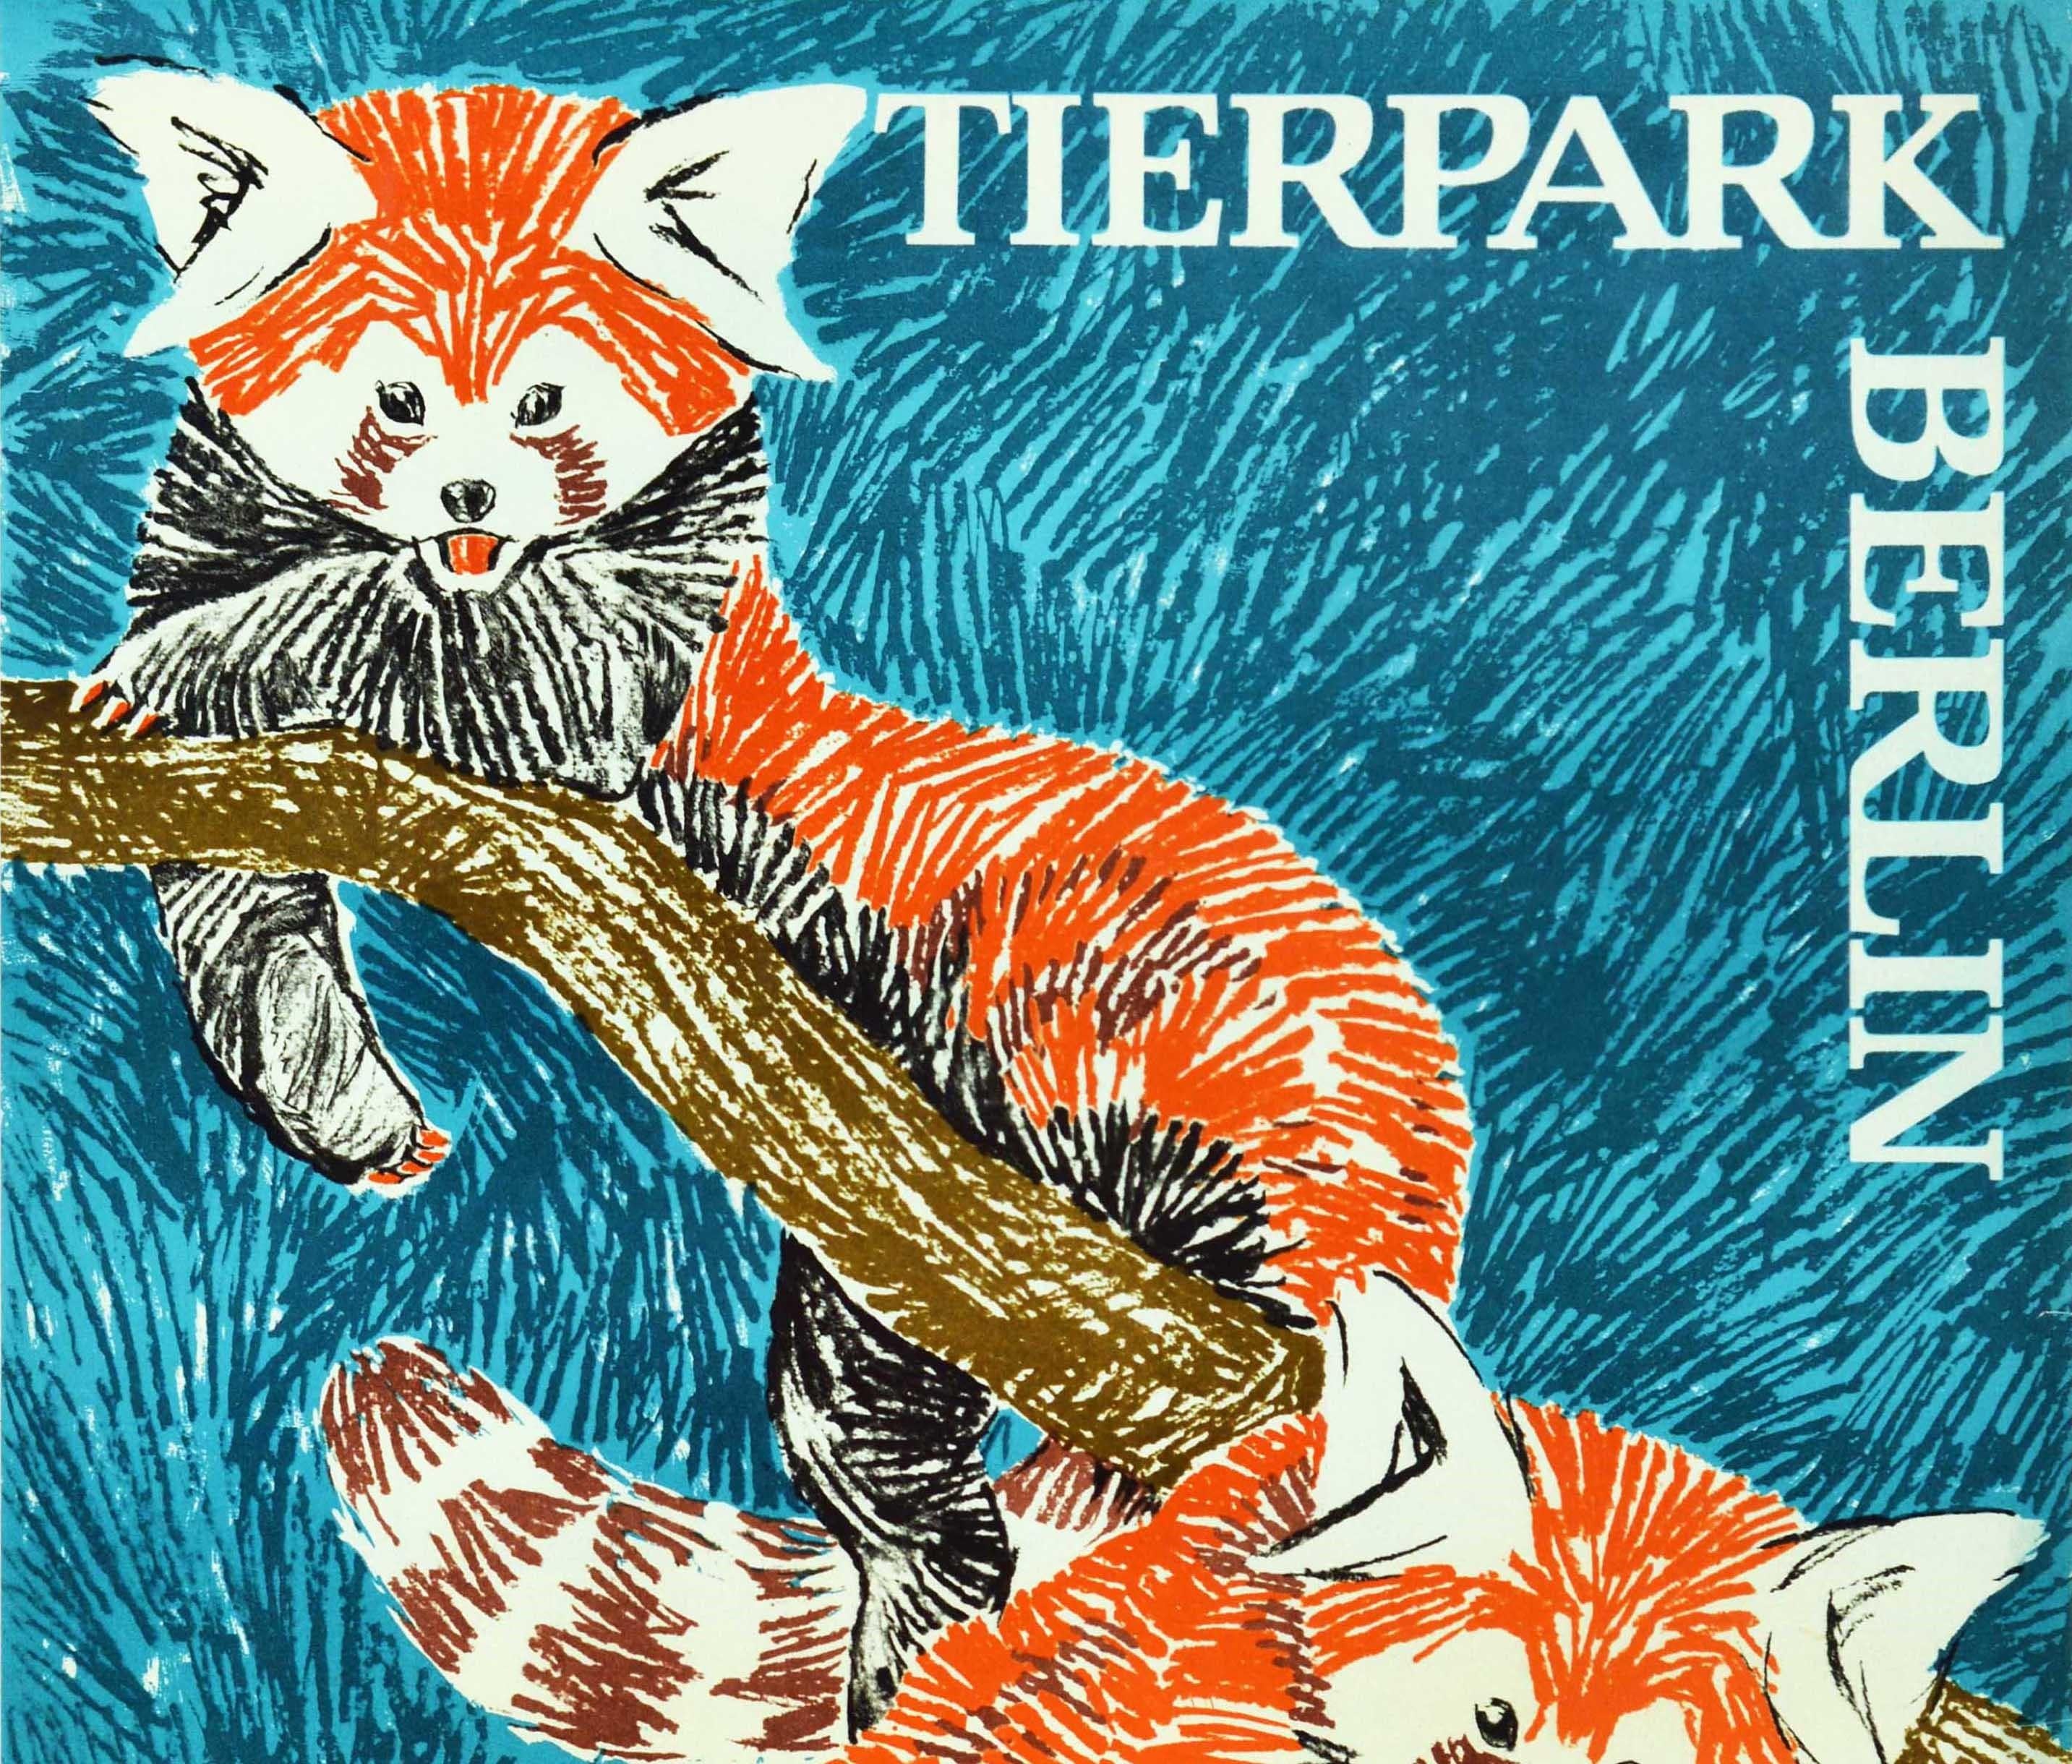 Original vintage poster for the Tierpark Berlin Zoo featuring a fantastic sketched image of two red pandas on a tree branch against a blue background. Berlin Zoo was founded in 1955. Very good condition, minor creasing, small tears on edges.